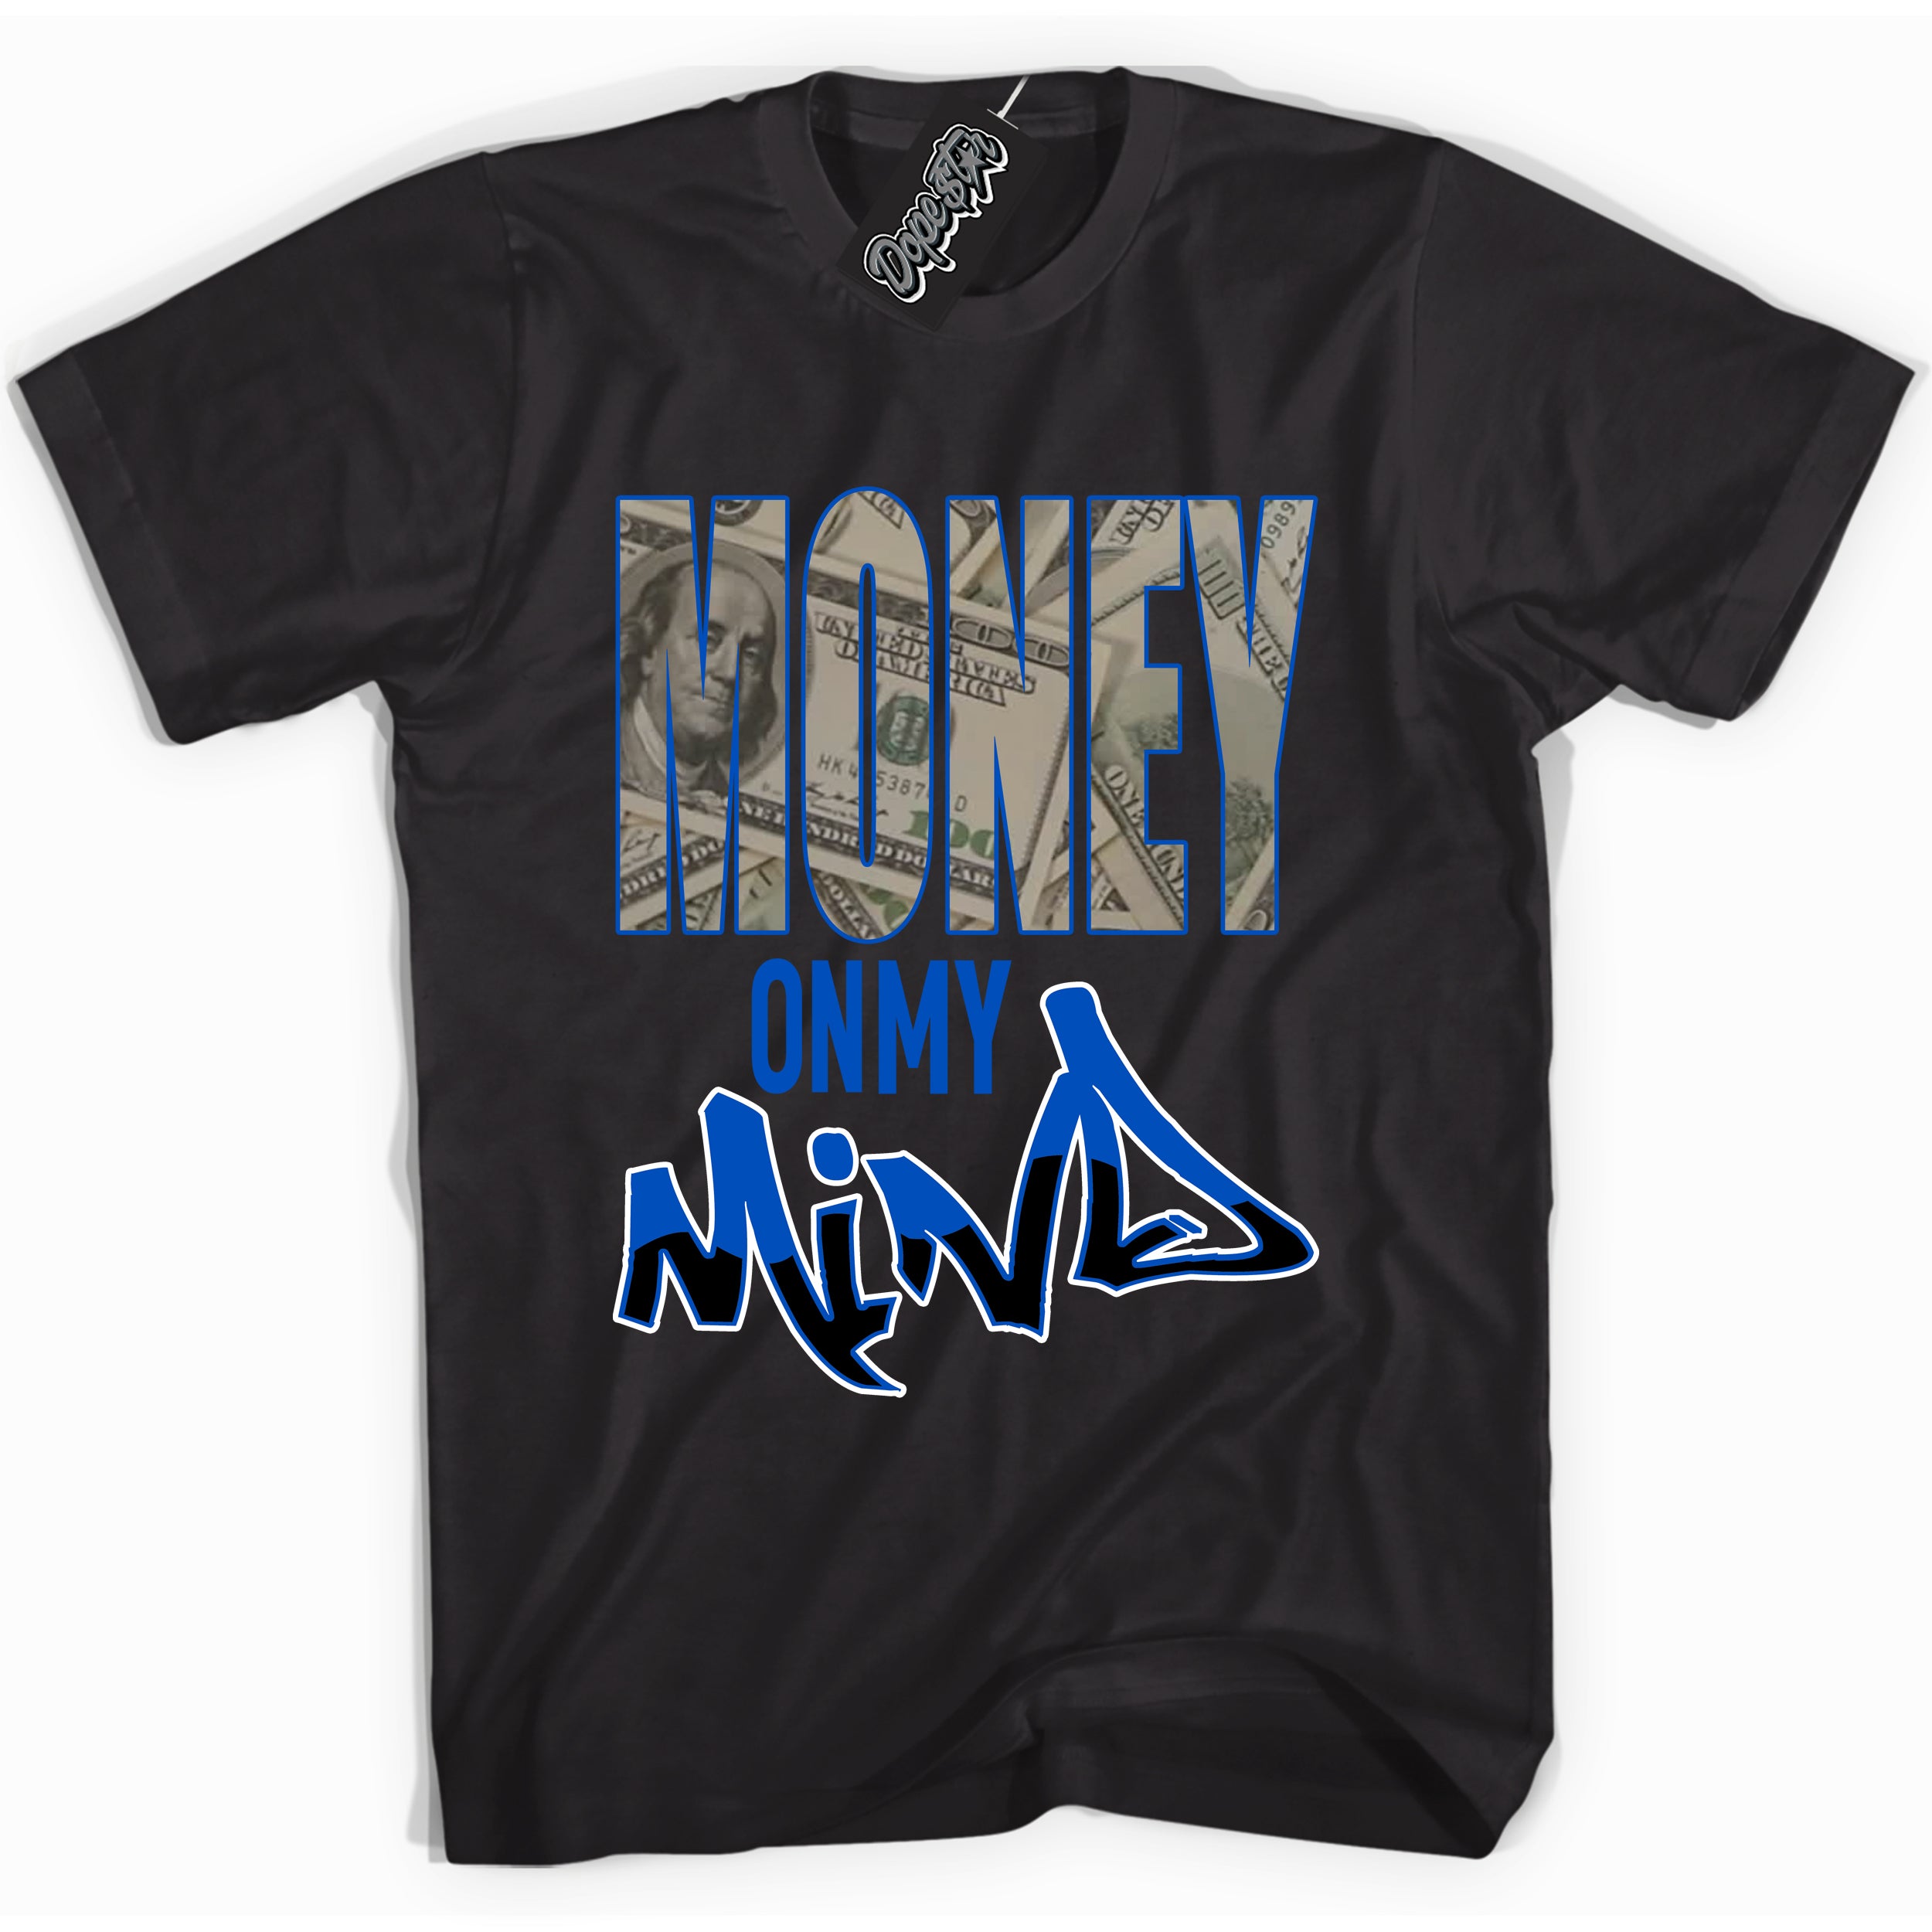 Cool Black graphic tee with Money On My Mind print, that perfectly matches OG Royal Reimagined 1s sneakers 